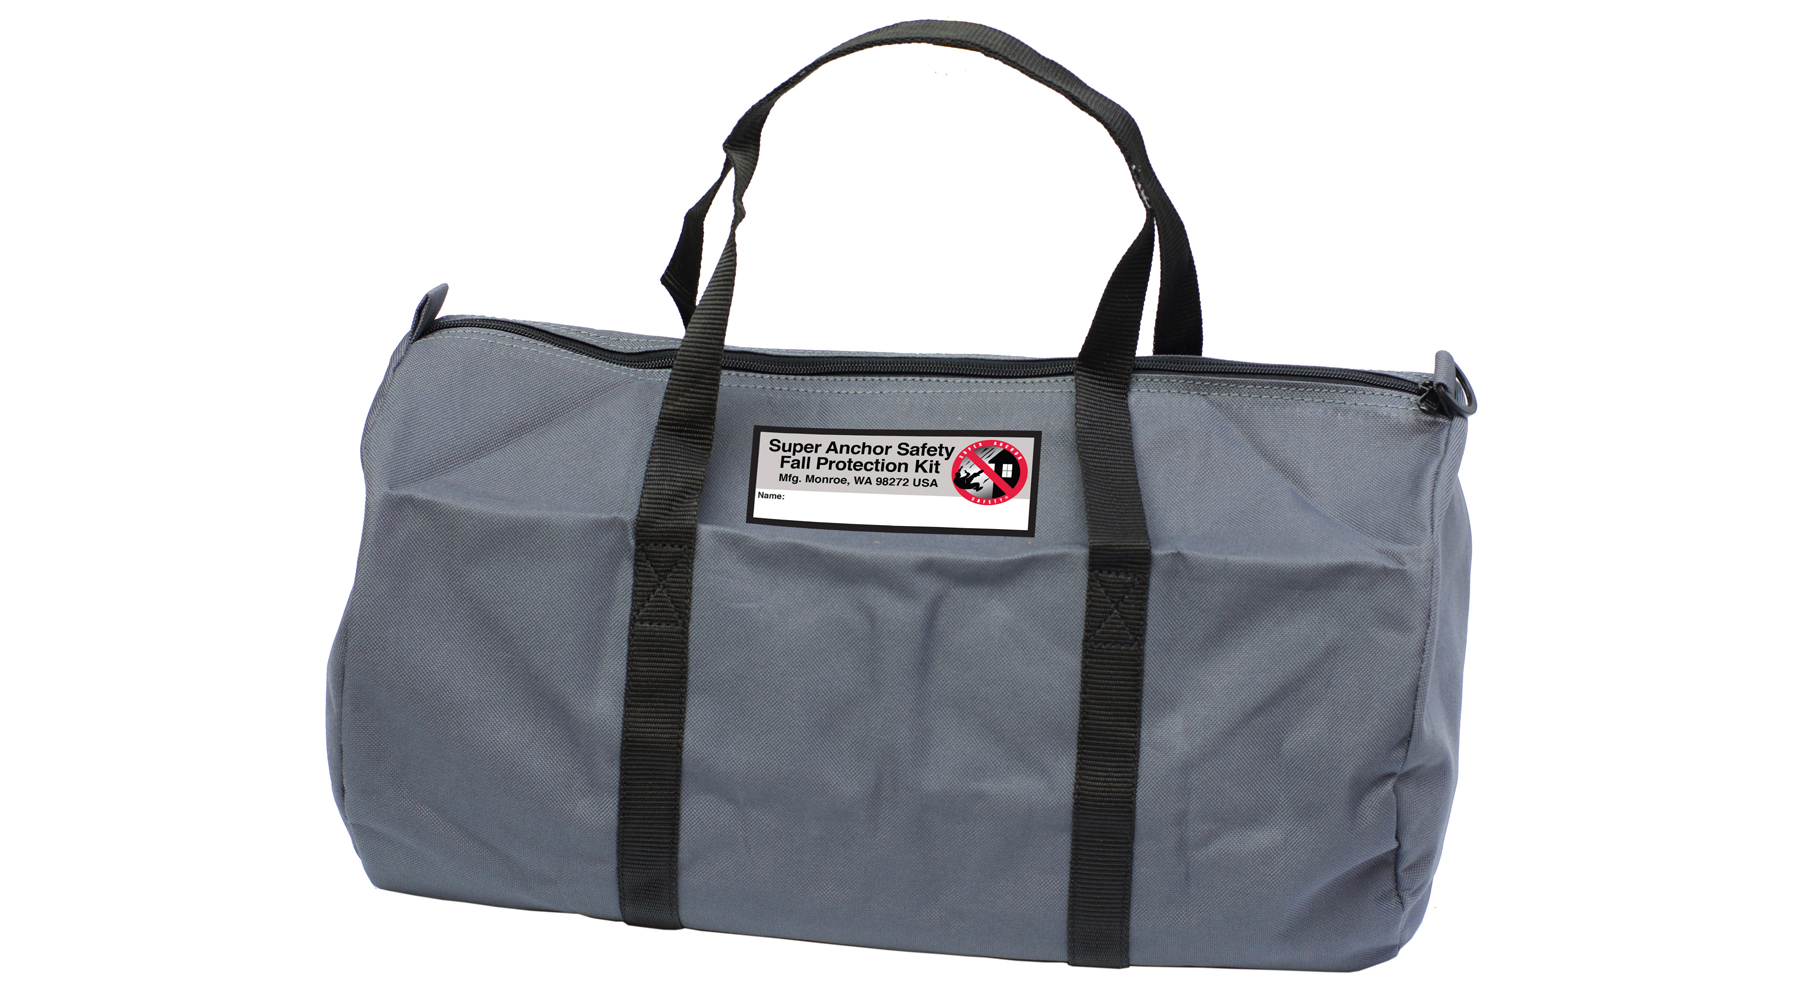 Cargo Carry Bags - Total Package